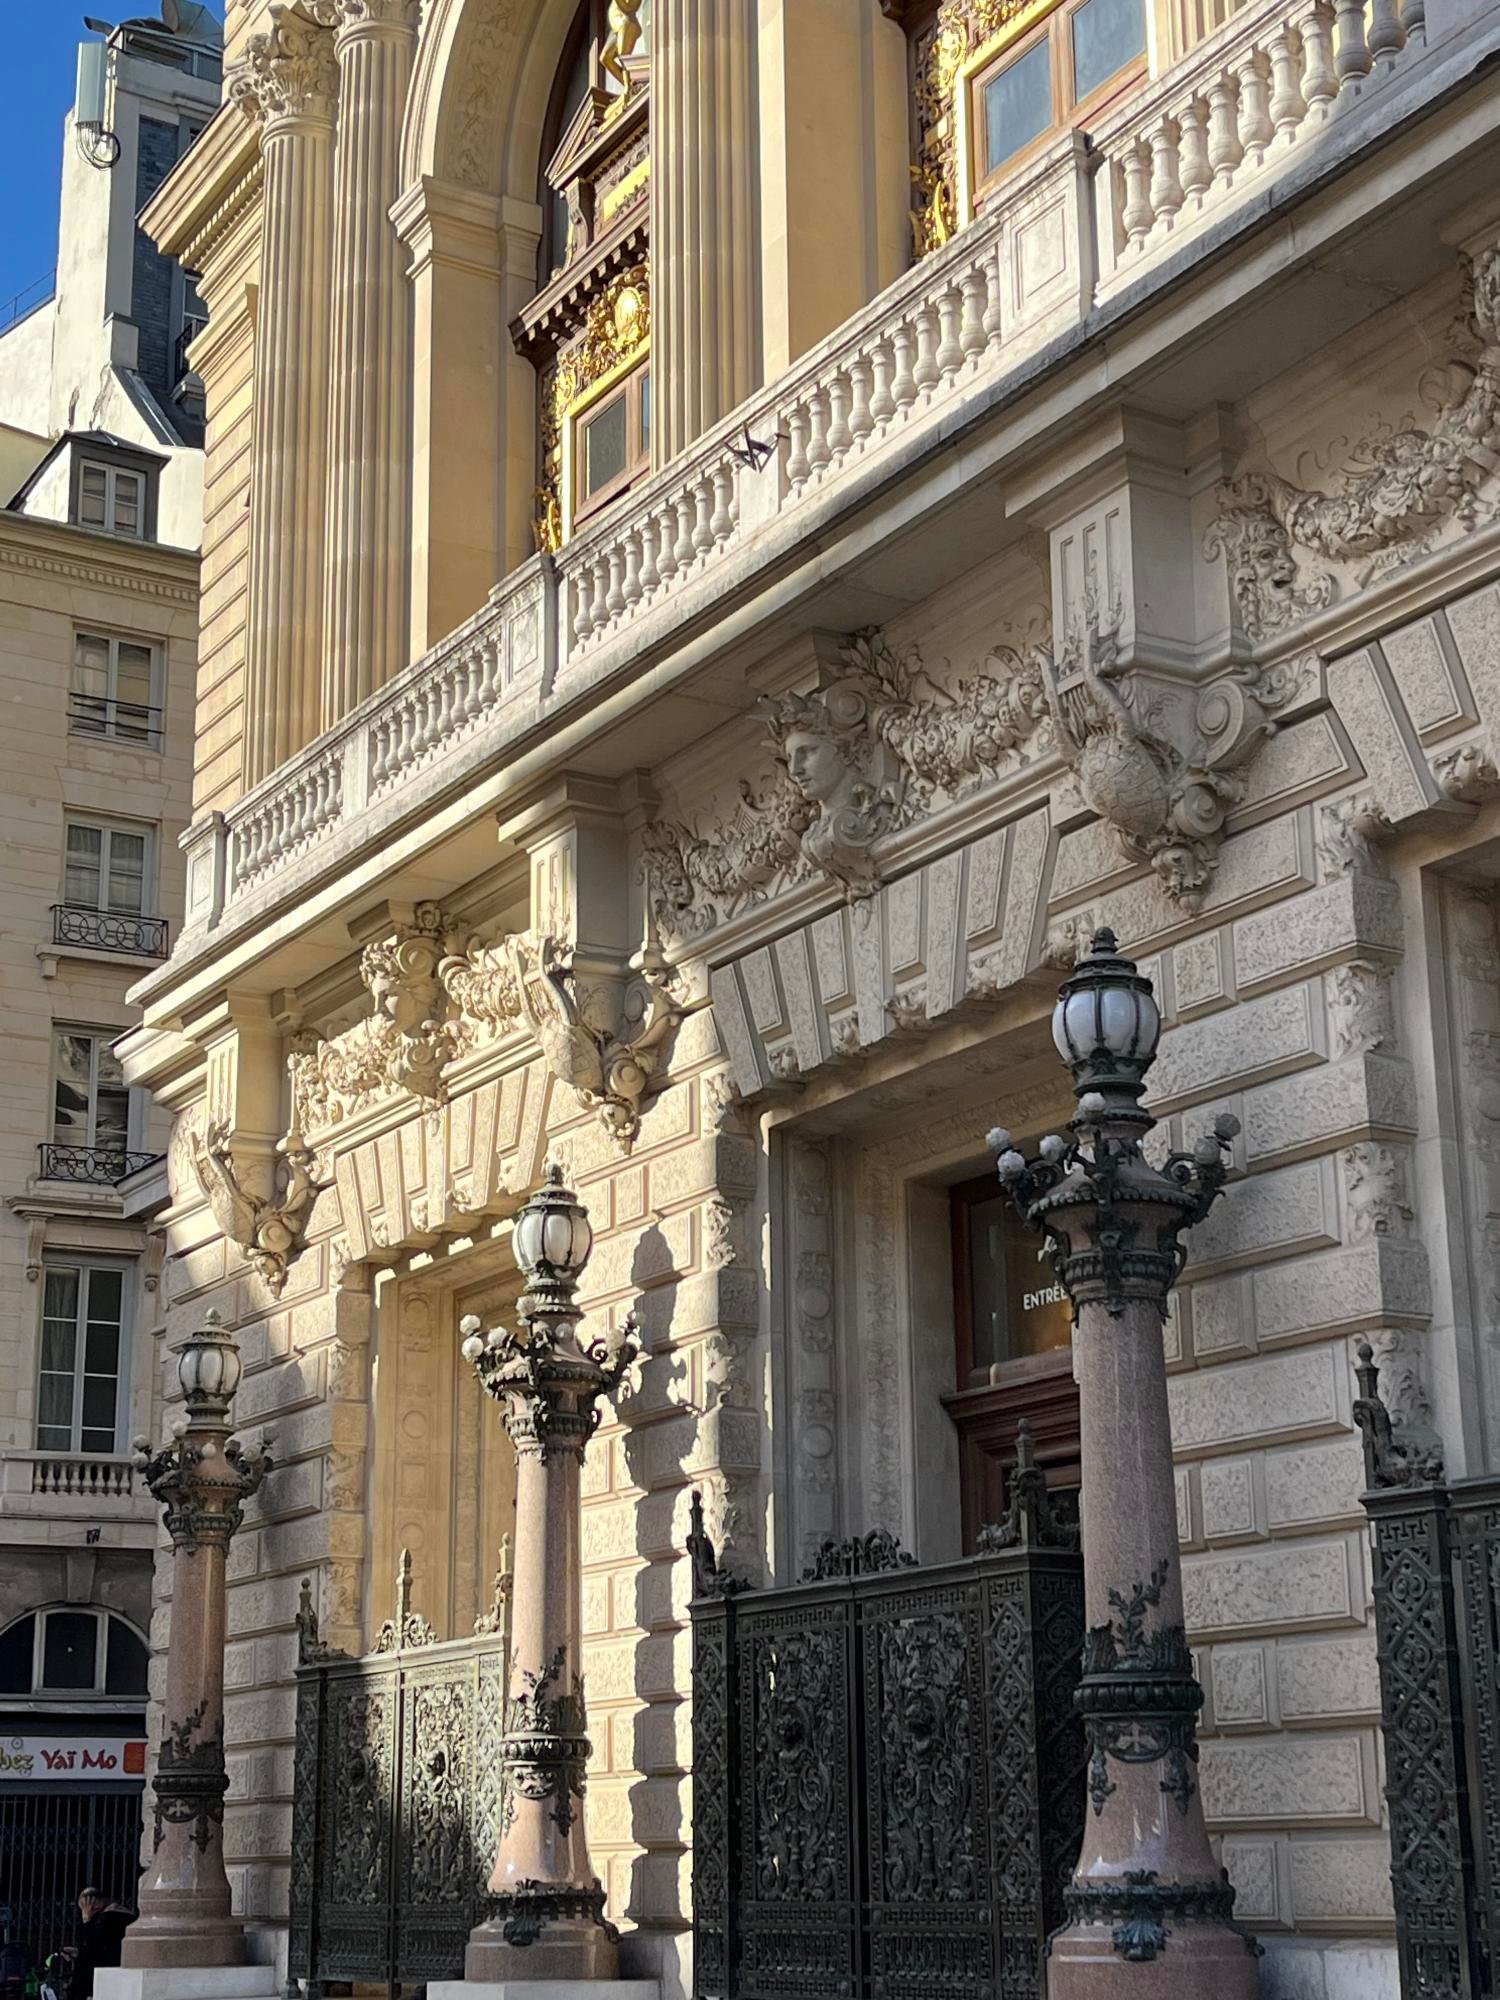 The Salle Favart, or the Opera Comique, is on the Boieldieu place, behind the Hotel Gramont Paris